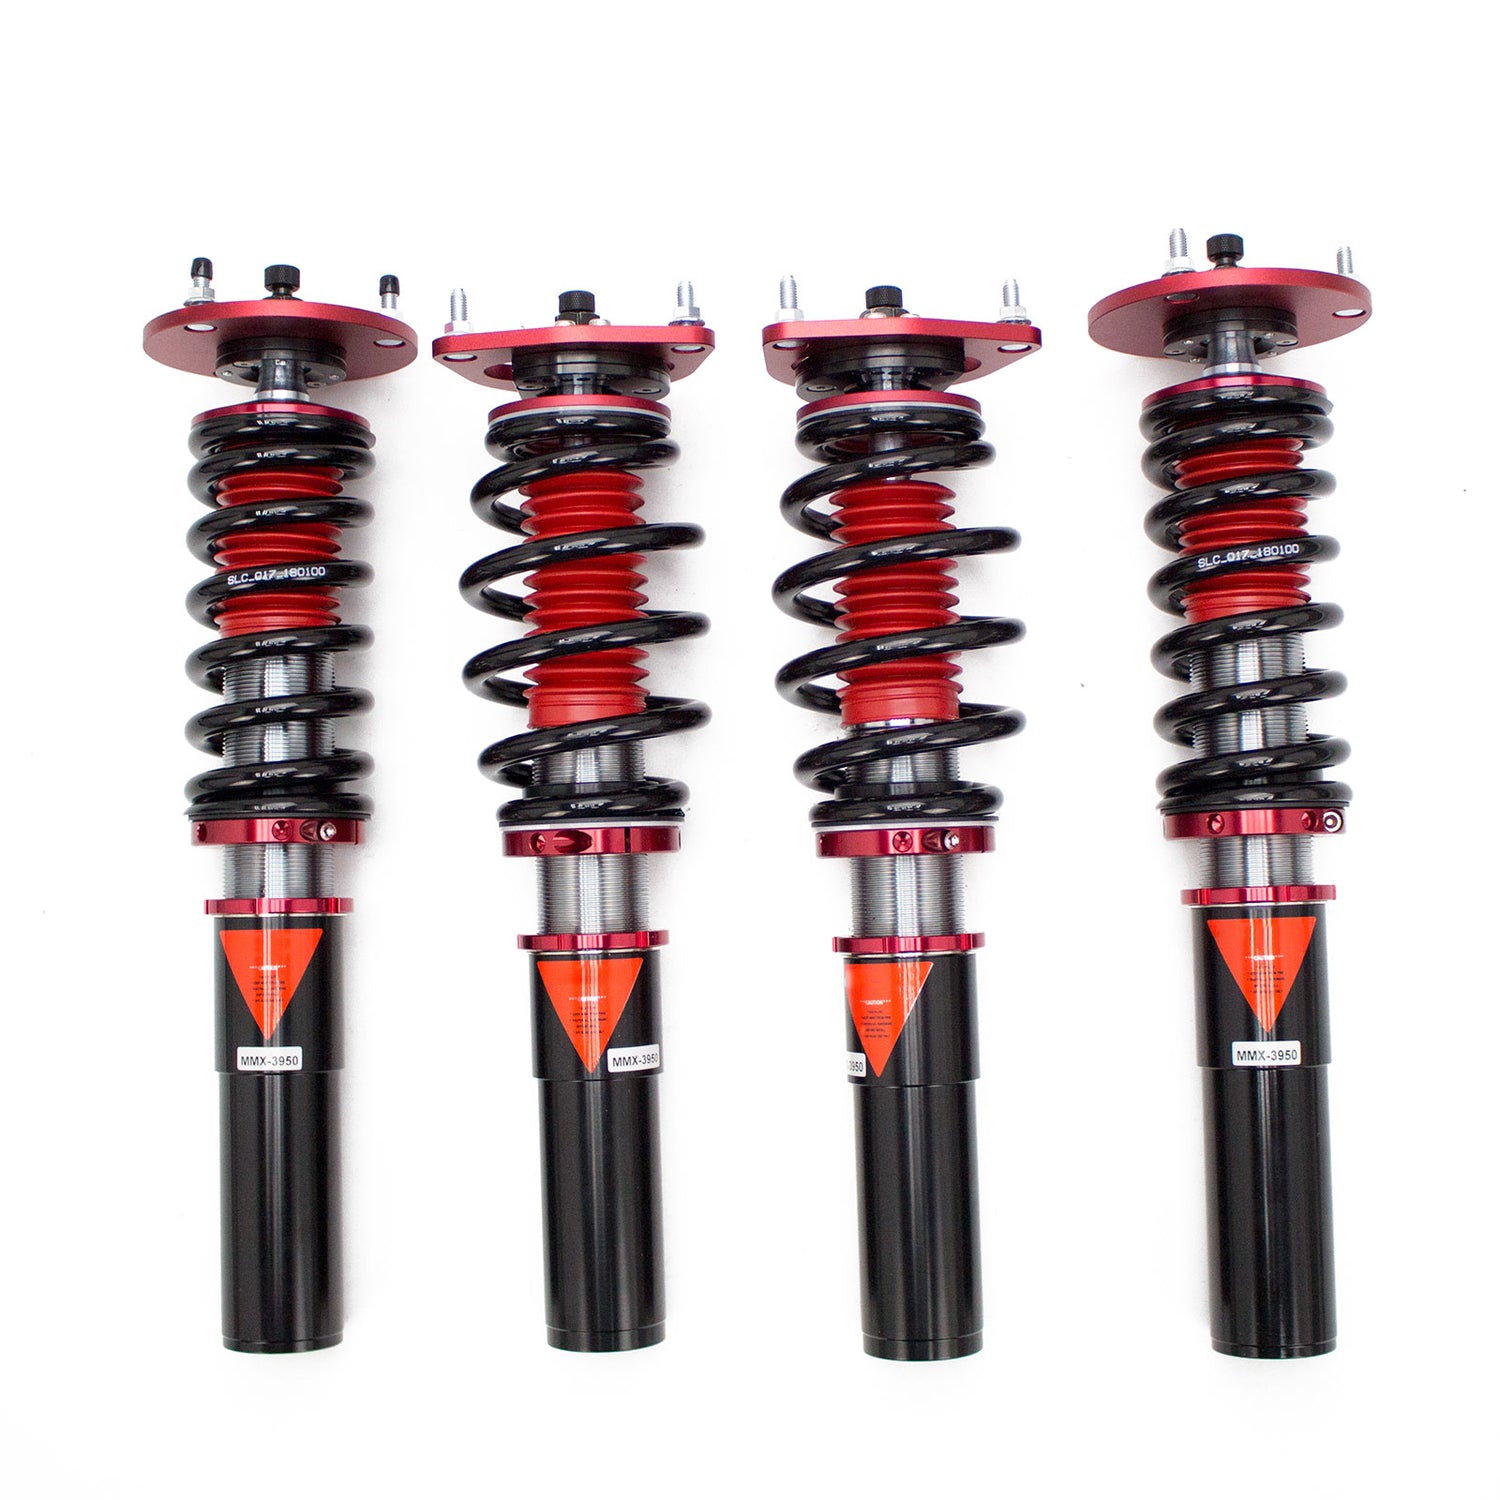 MMX3950-A MAXX Coilovers Lowering Kit, Fully Adjustable, Ride Height, 40 Clicks Rebound Settings, Porsche Boxster(981) 2013-16